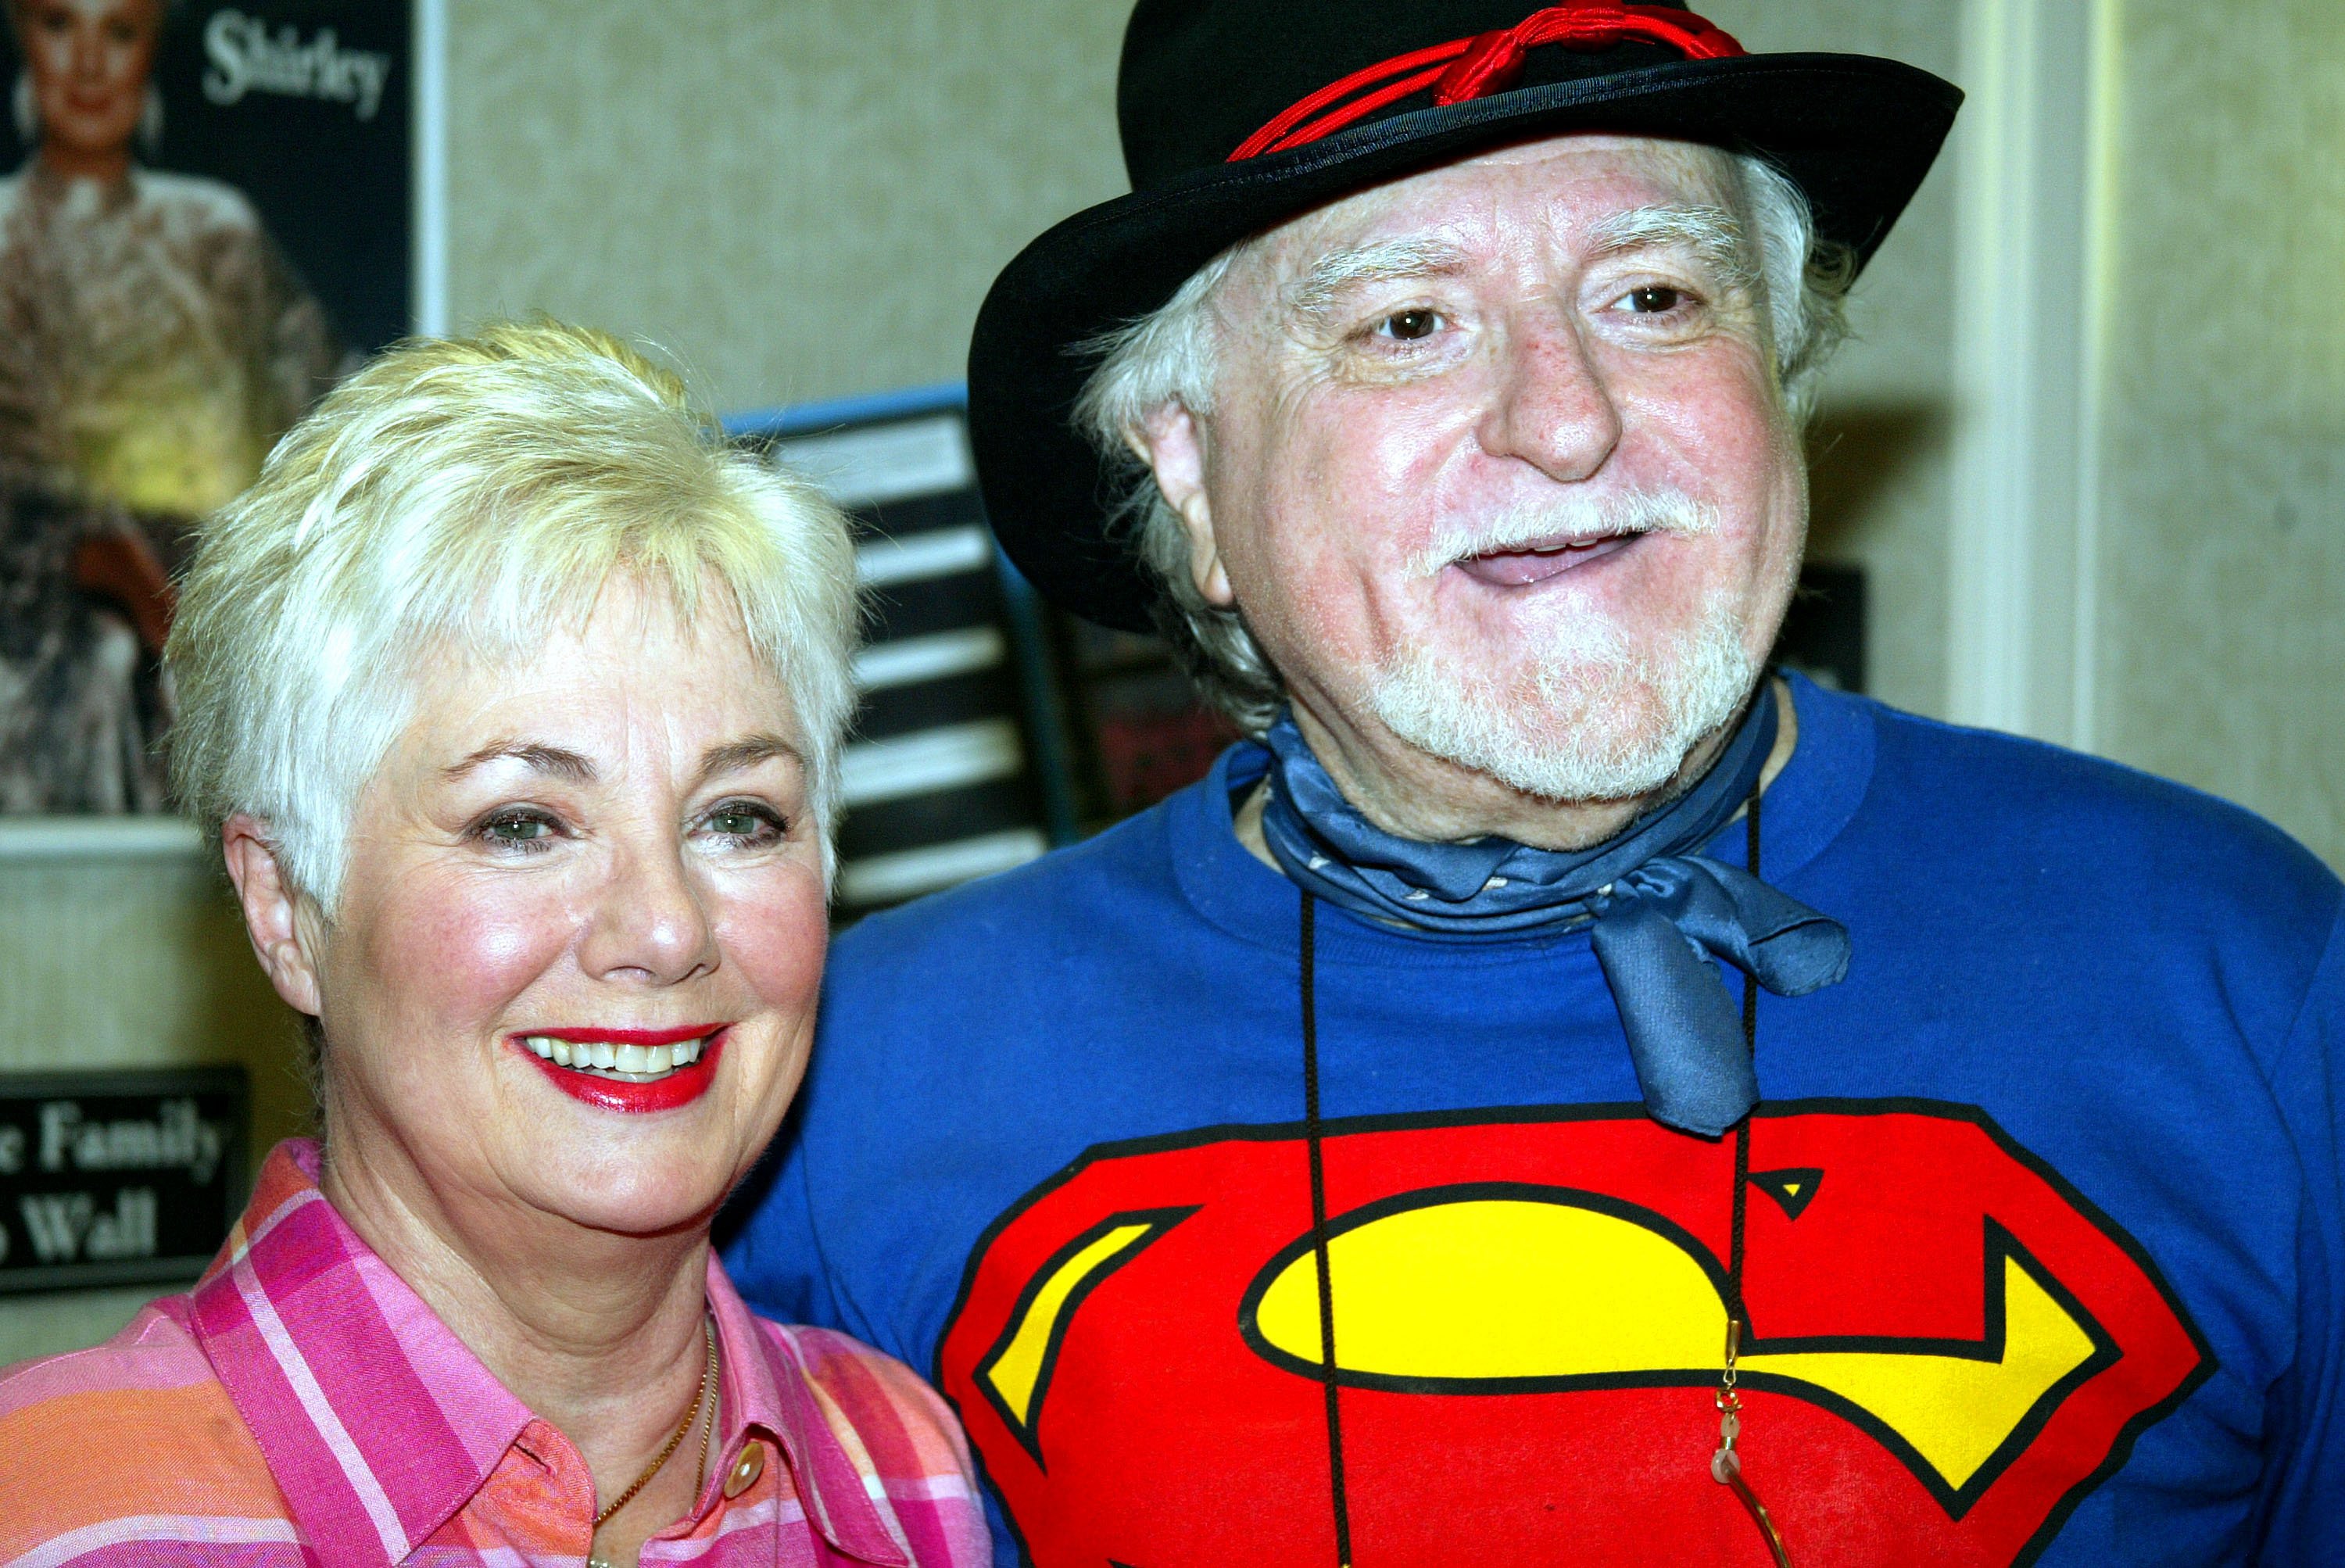 Shirley Jones and Marty Ingels during Hollywood Collectors & Celebrities Show on June 28, 2003, in North Hollywood, California. | Source: Eric Isaacs/FilmMagic/Getty Images